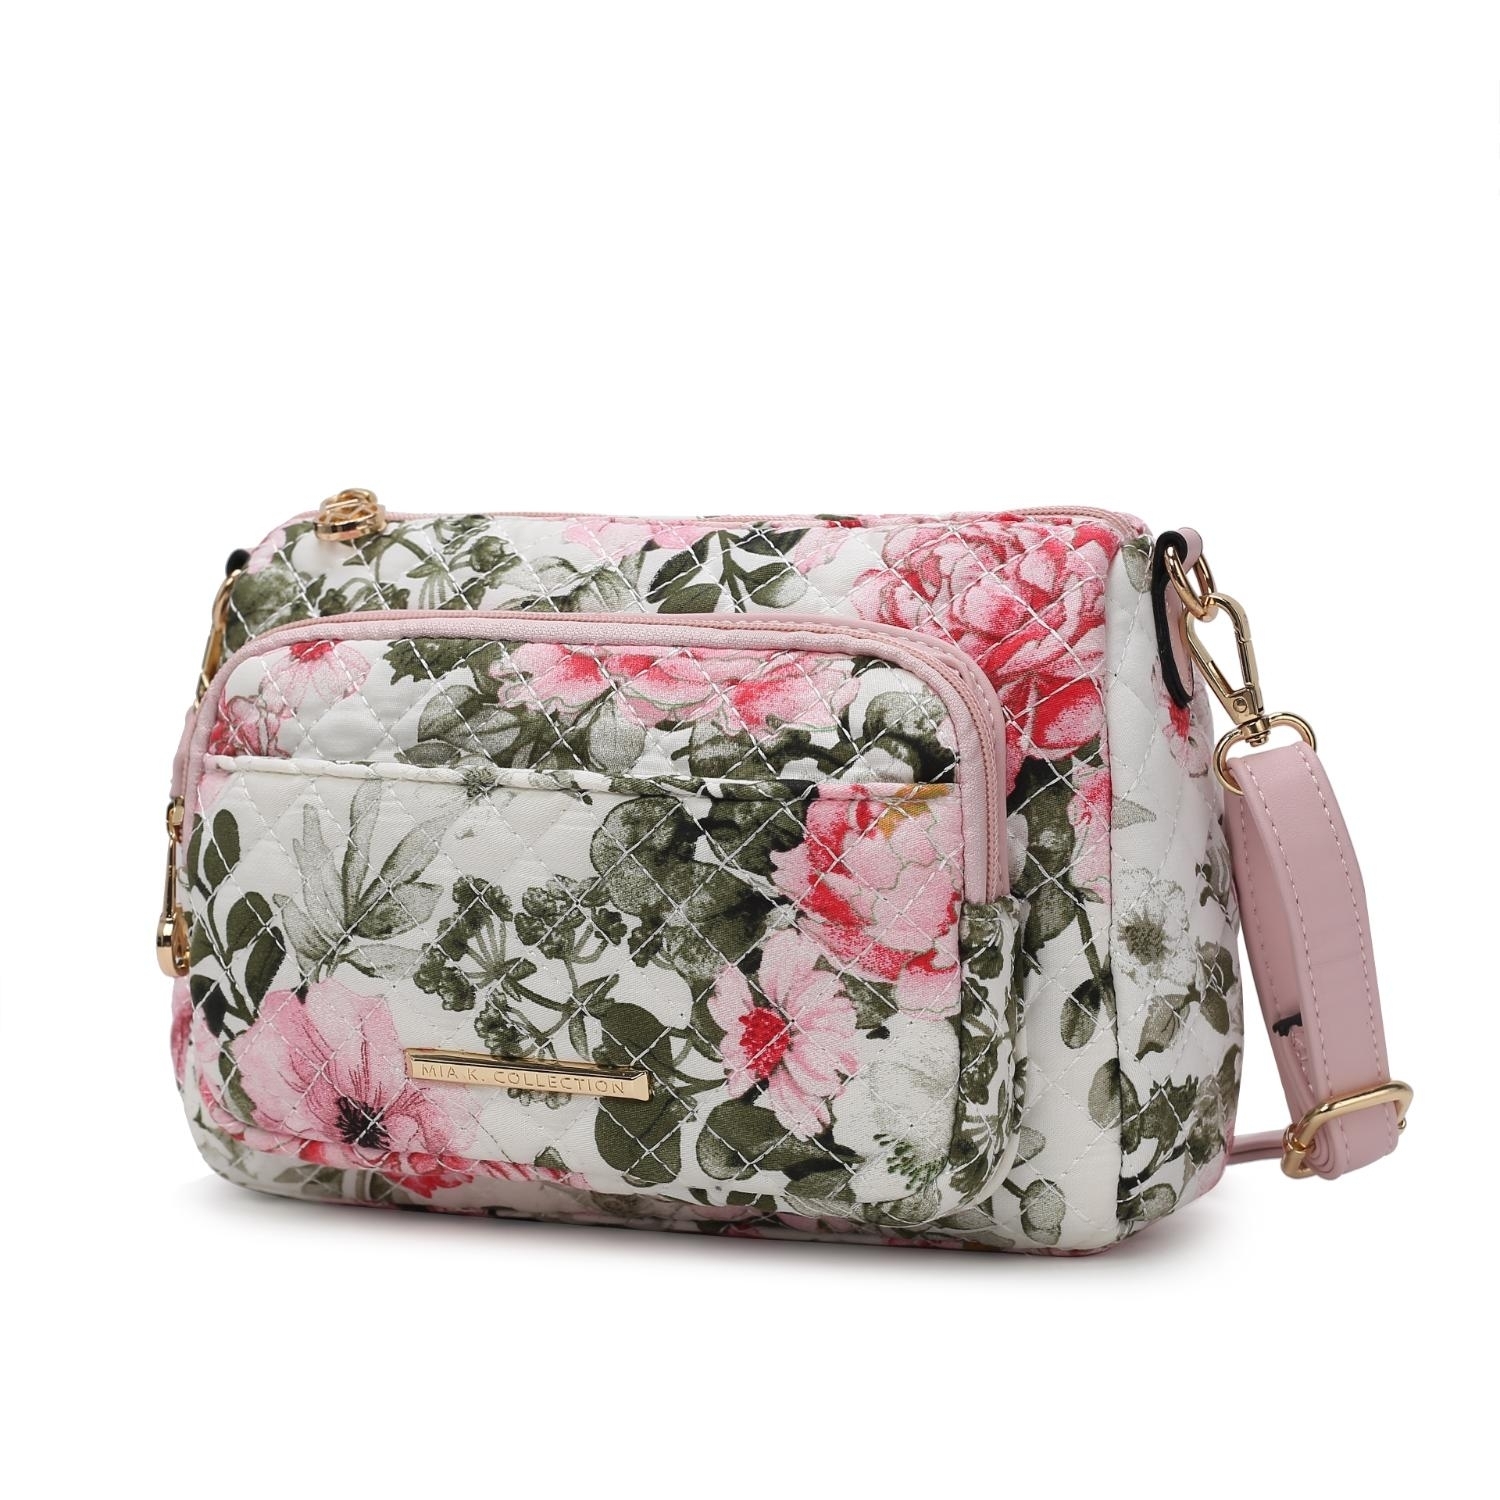 MKF Collection Rosalie Quilted Cotton Botanical Pattern Women's Shoulder Bag By Mia K - White